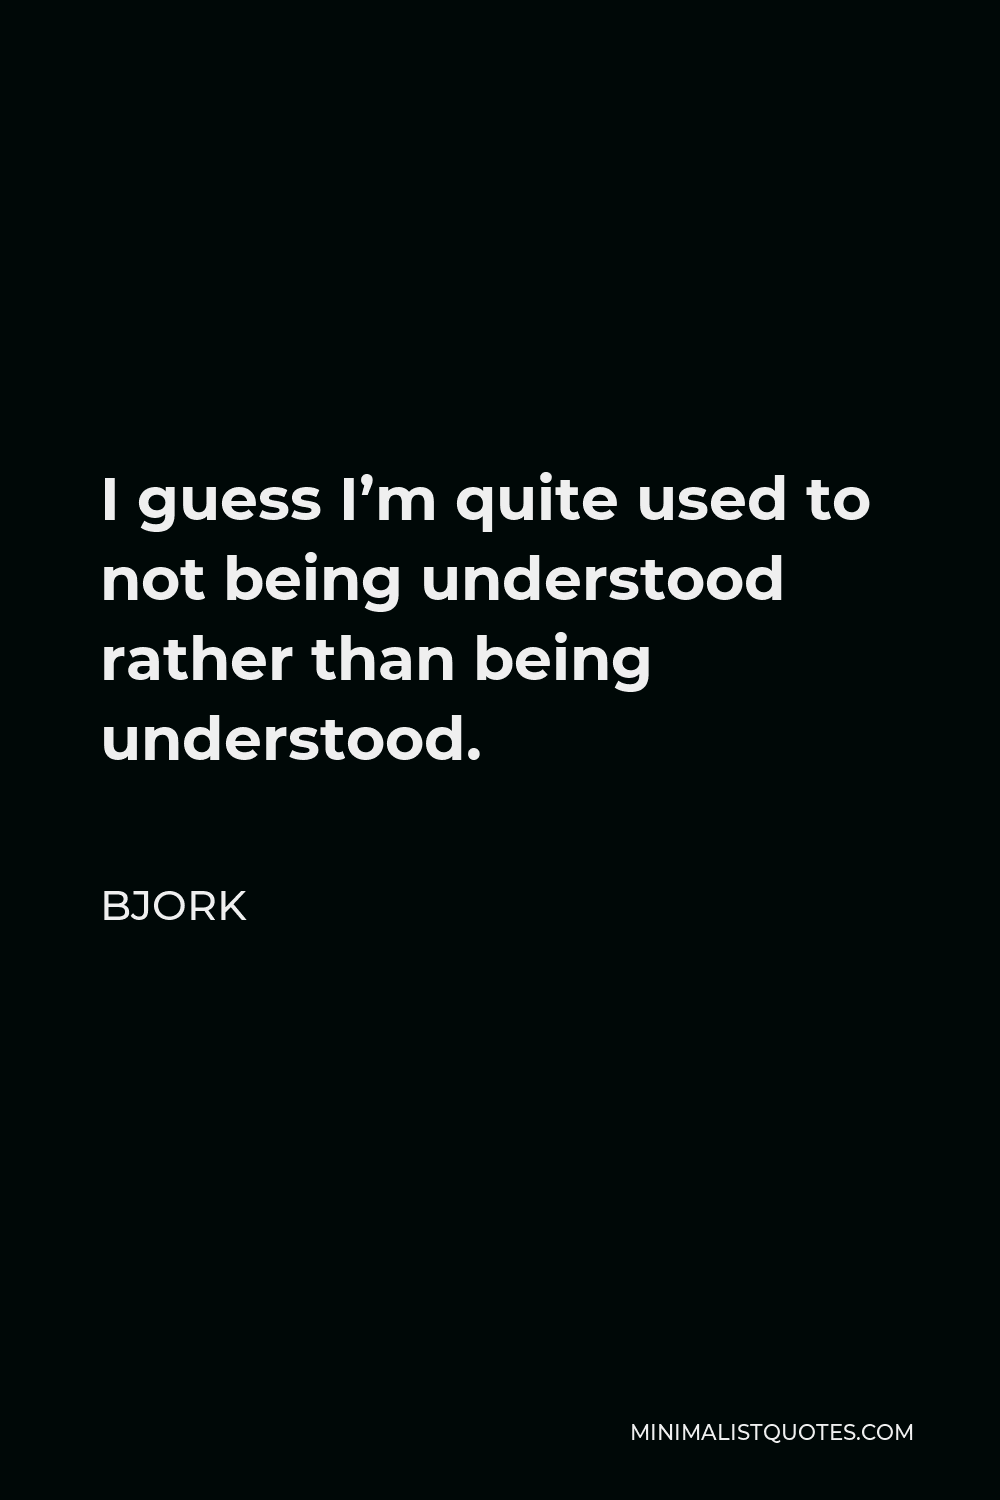 Bjork Quote - I guess I’m quite used to not being understood rather than being understood.